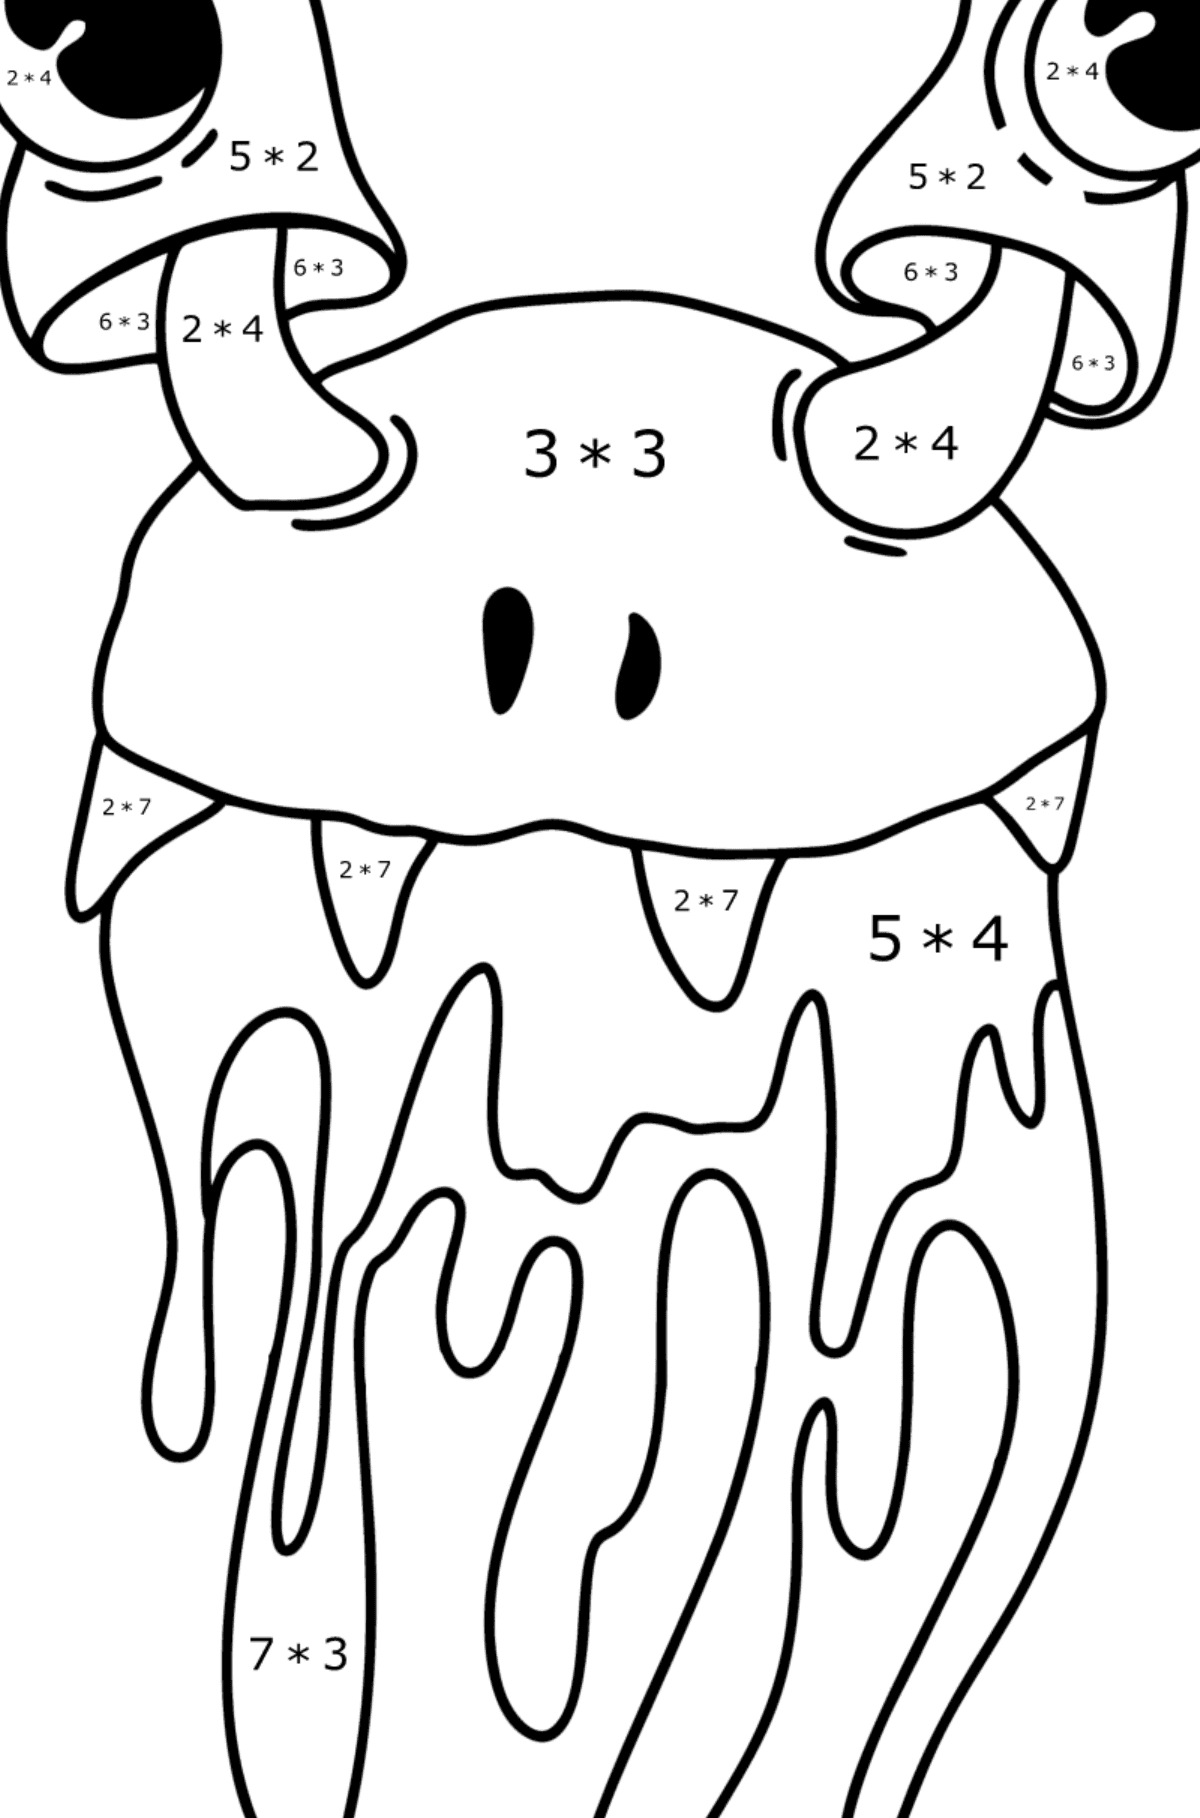 Cartoon monster face coloring page - Math Coloring - Multiplication for Kids